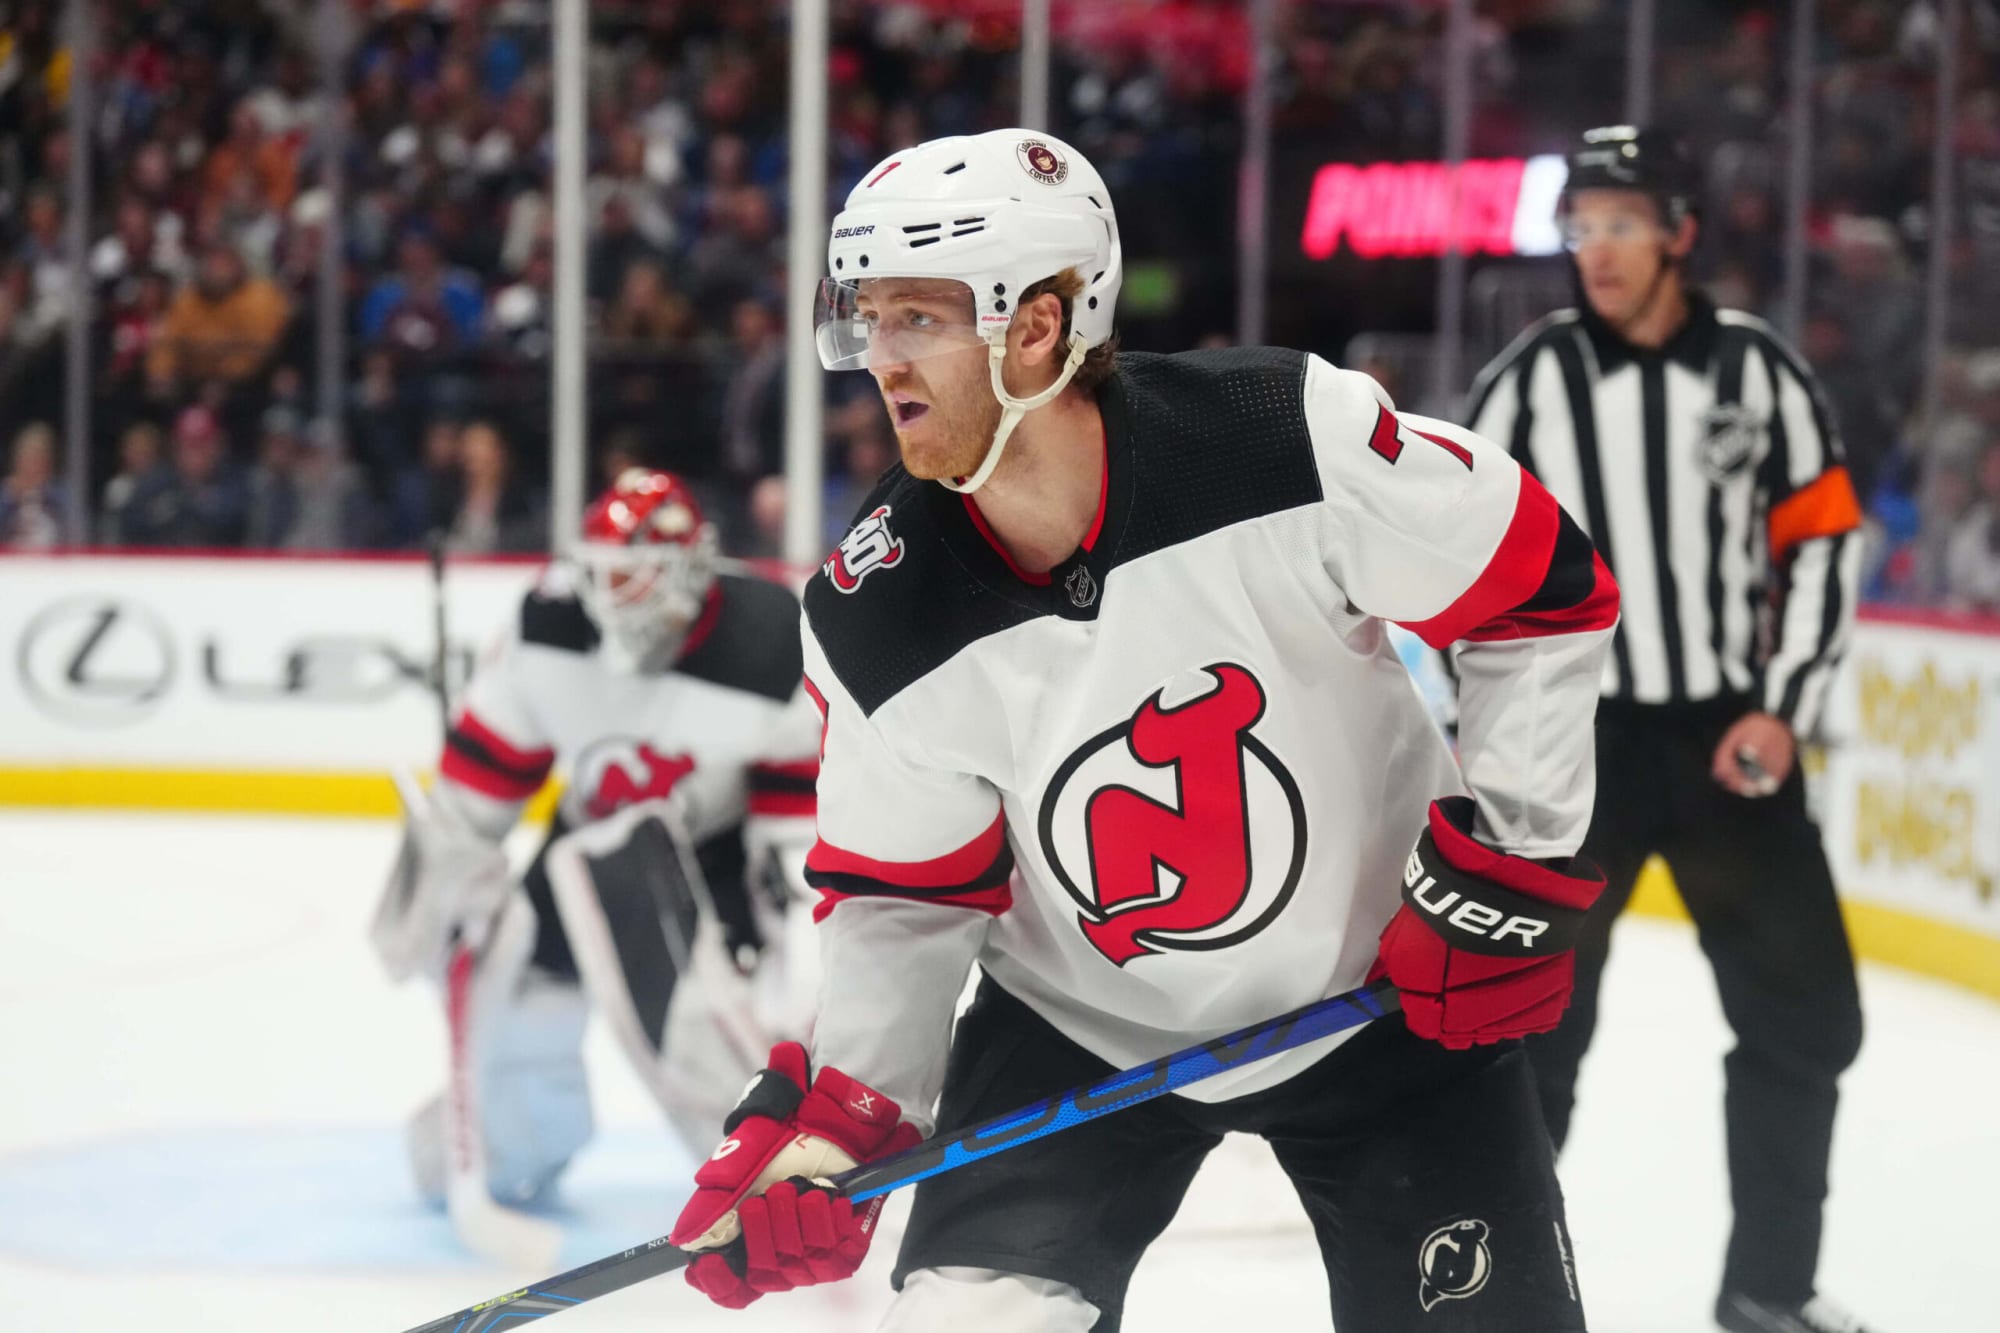 Where Do The New Jersey Devils Play?